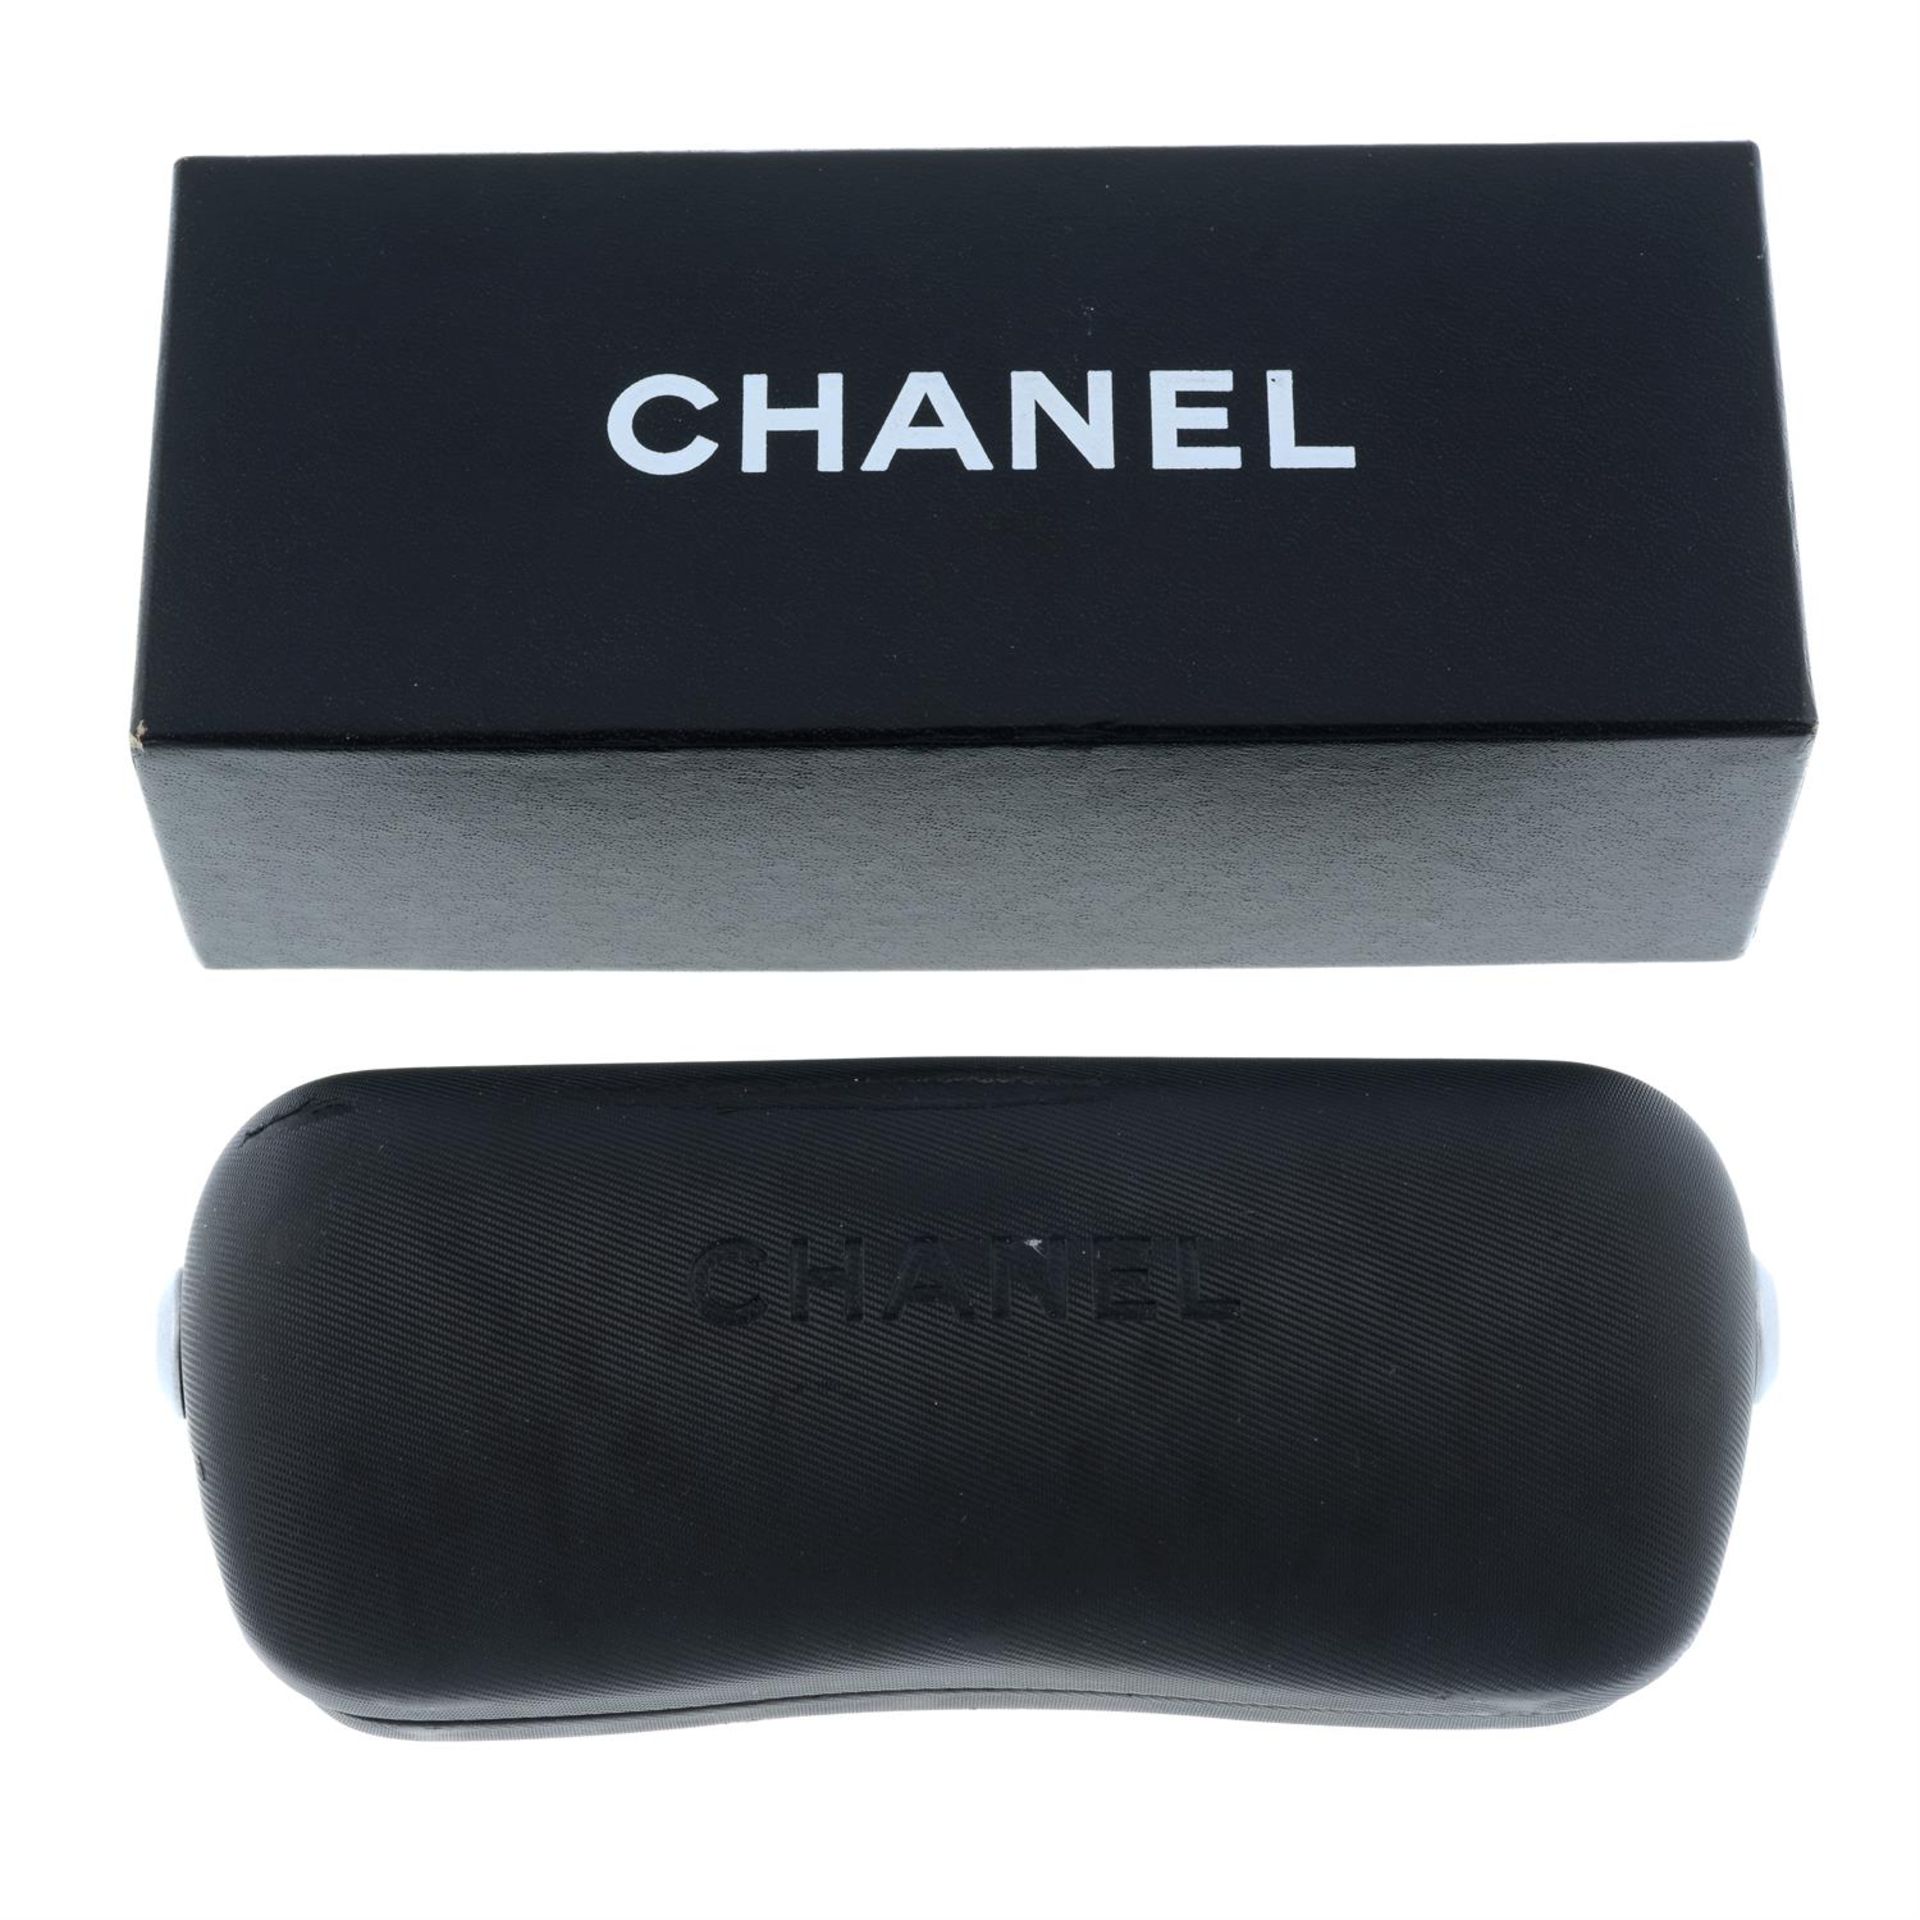 CHANEL - a pair of sunglasses. - Image 4 of 4